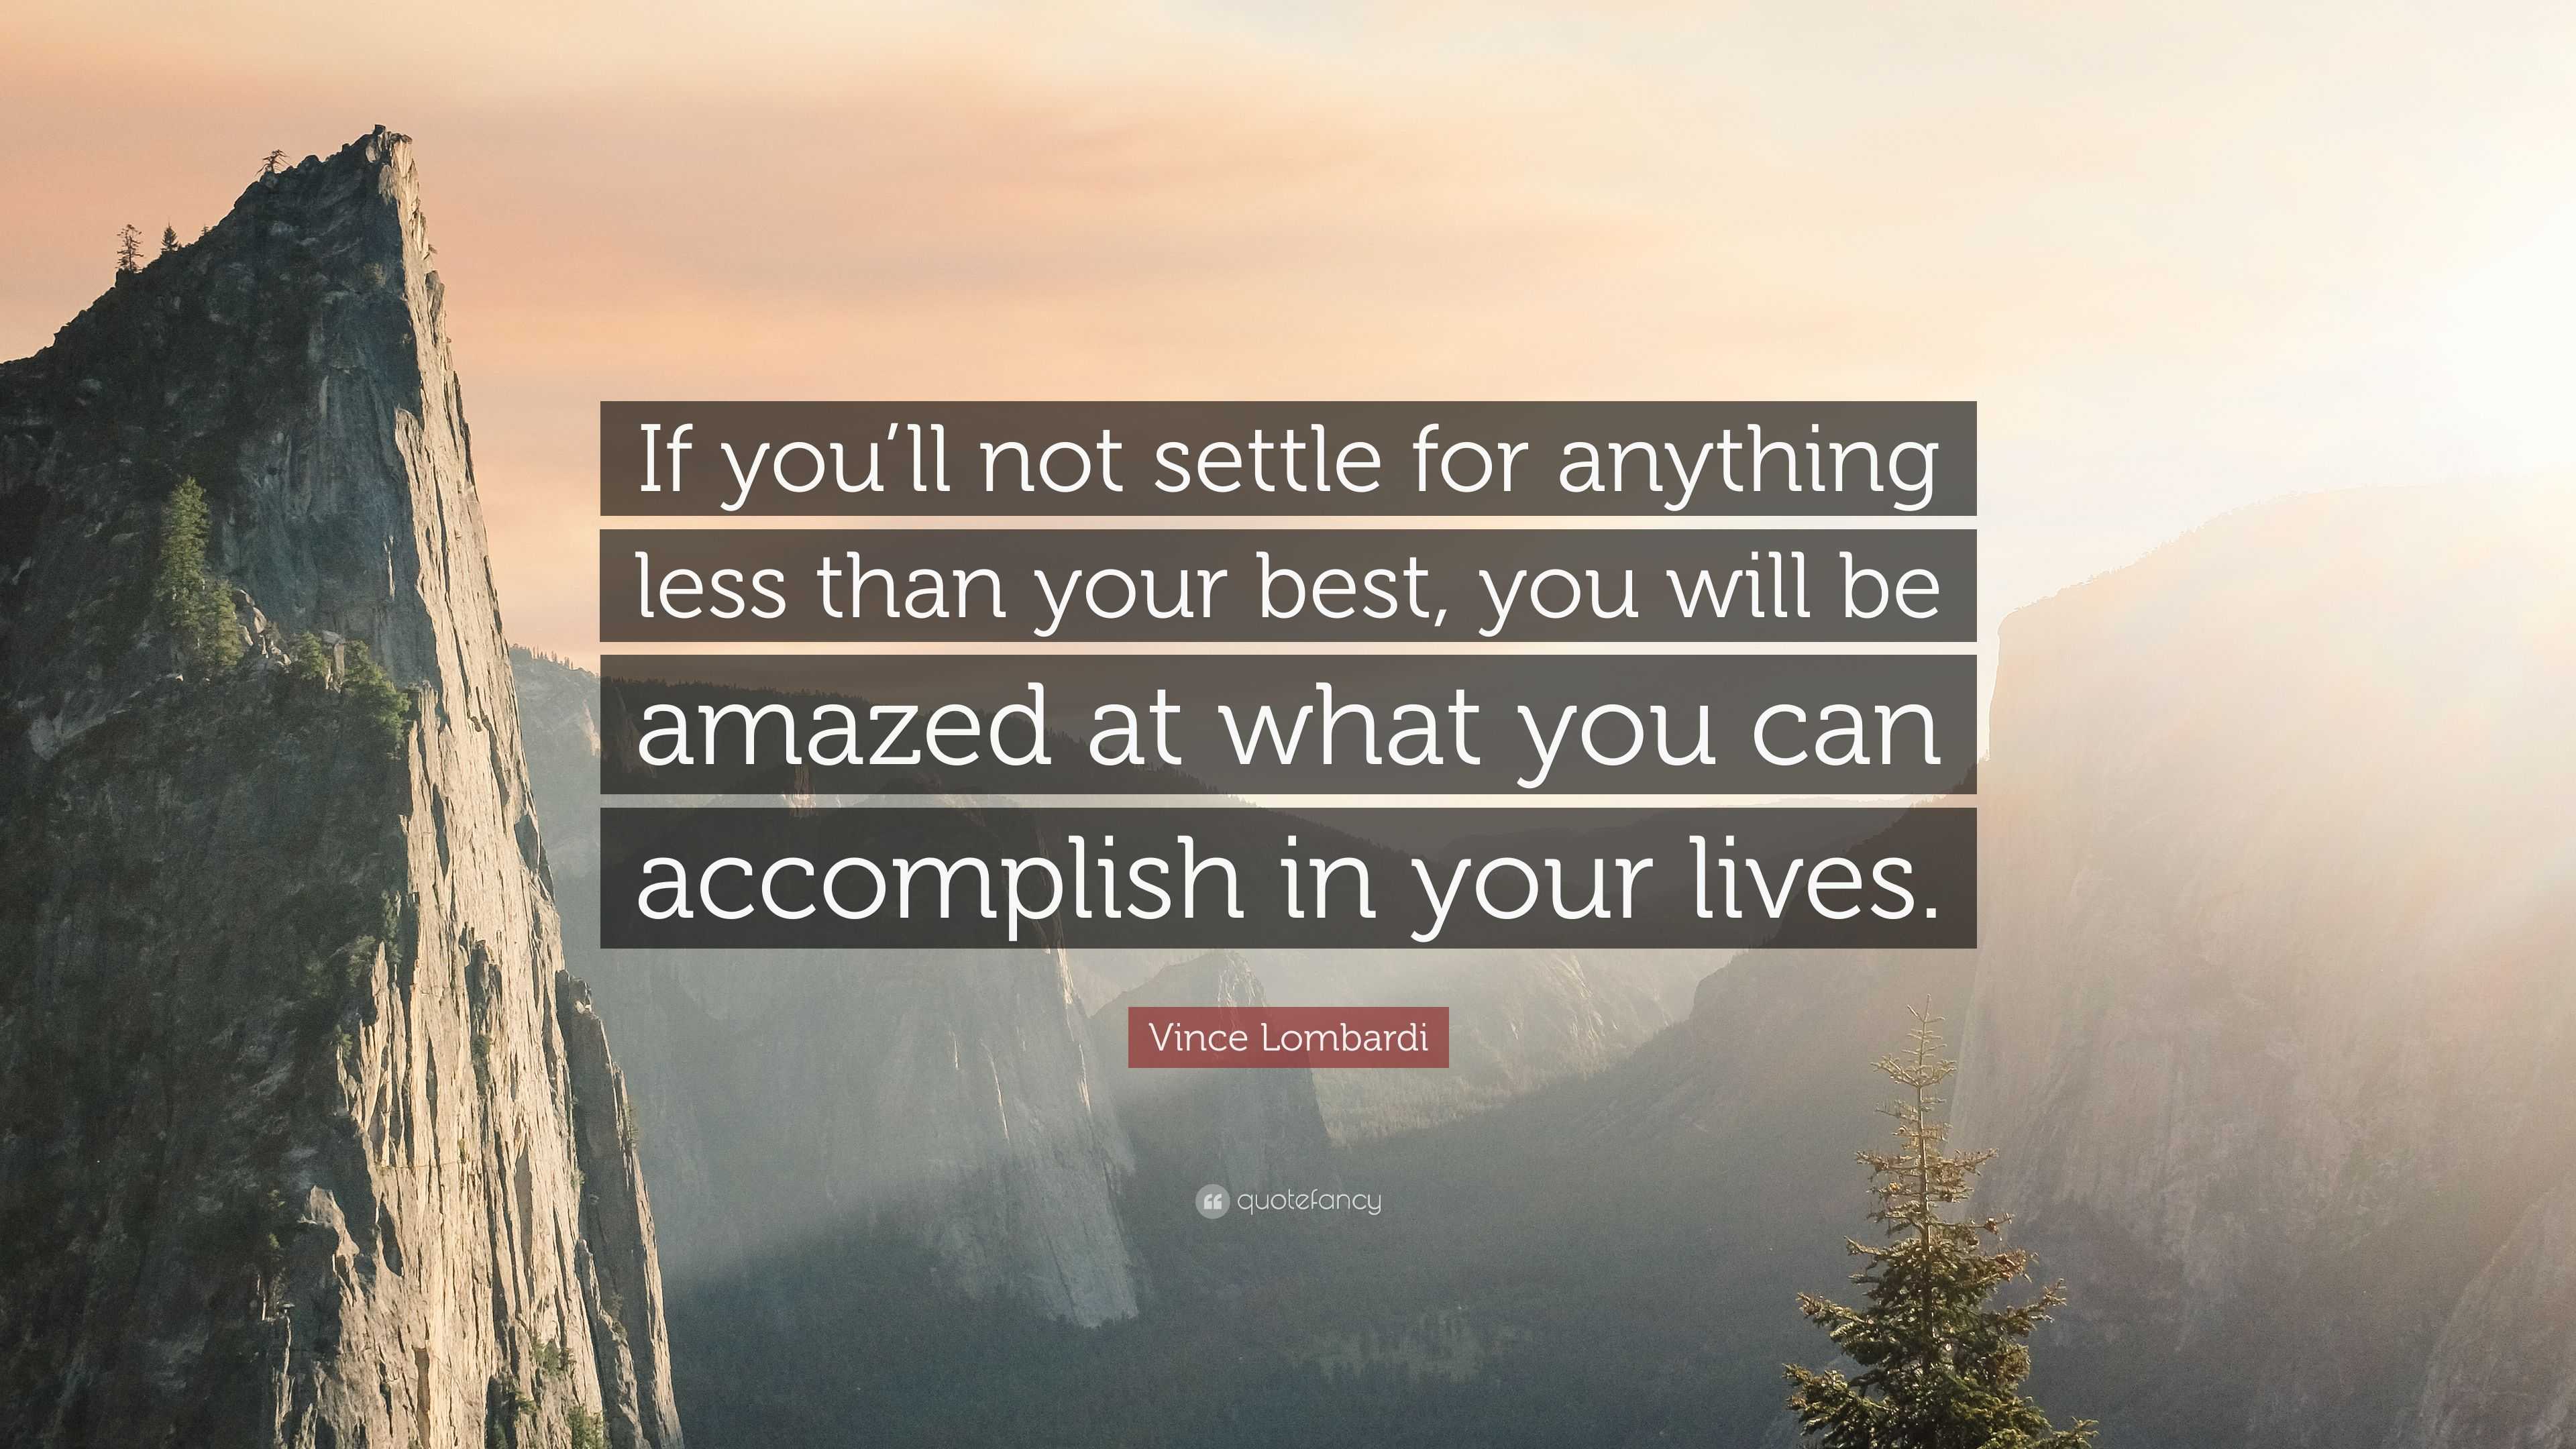 2048996 Vince Lombardi Quote If you ll not settle for anything less than